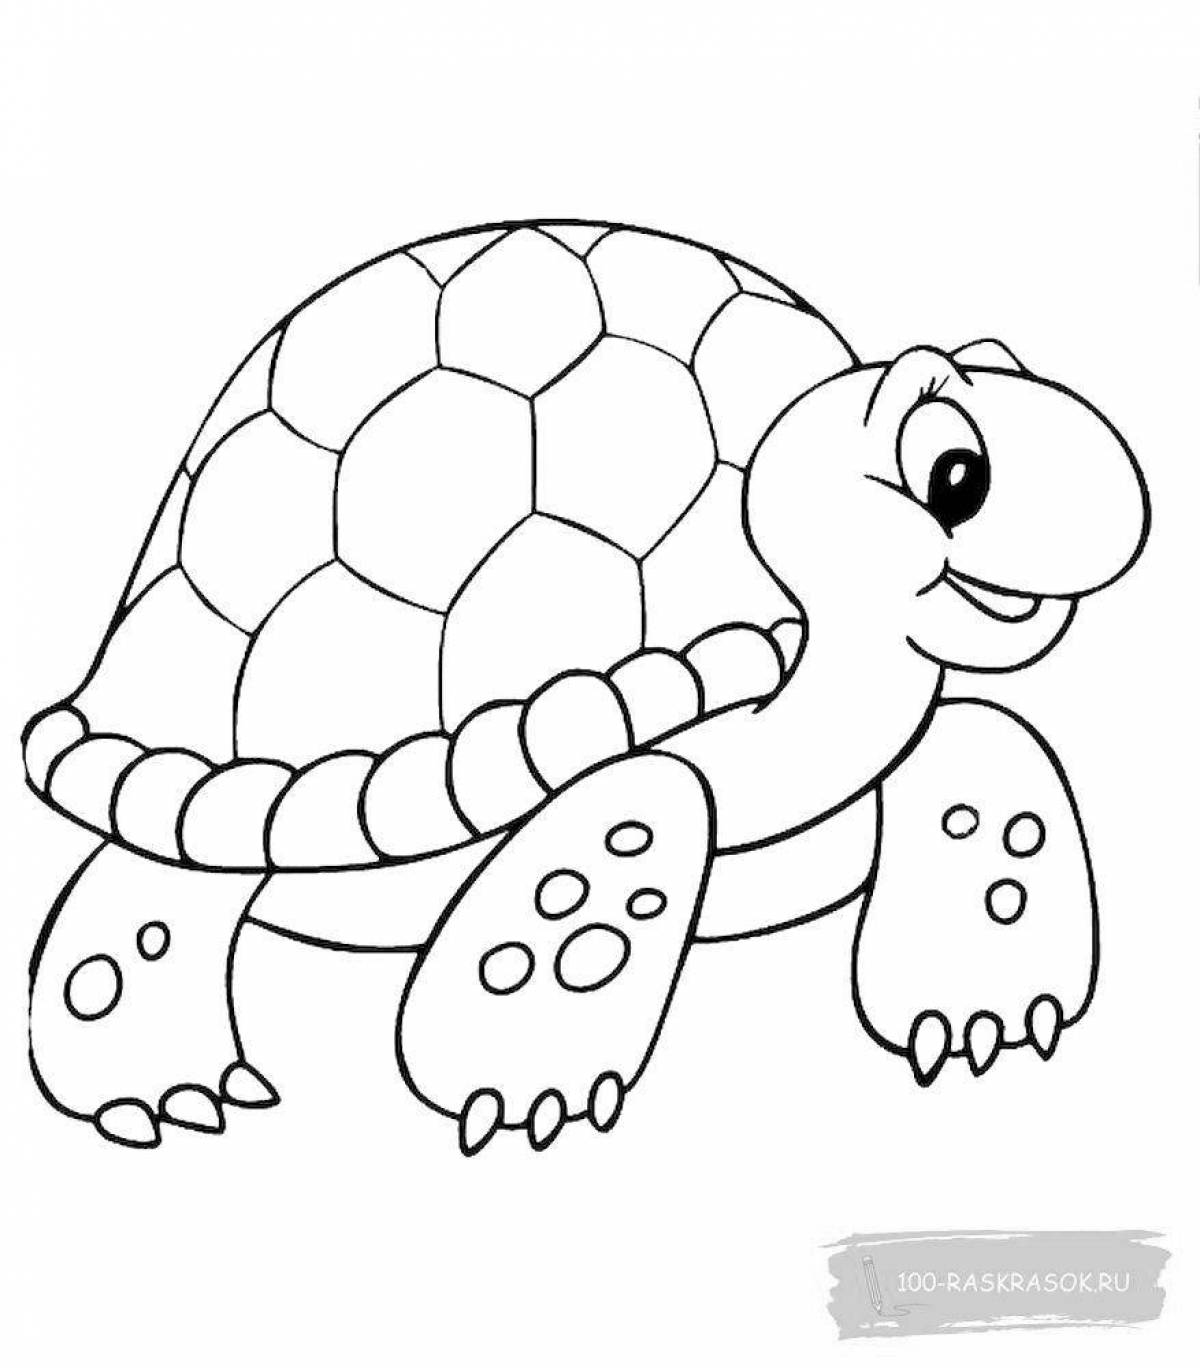 Turtle for kids #5